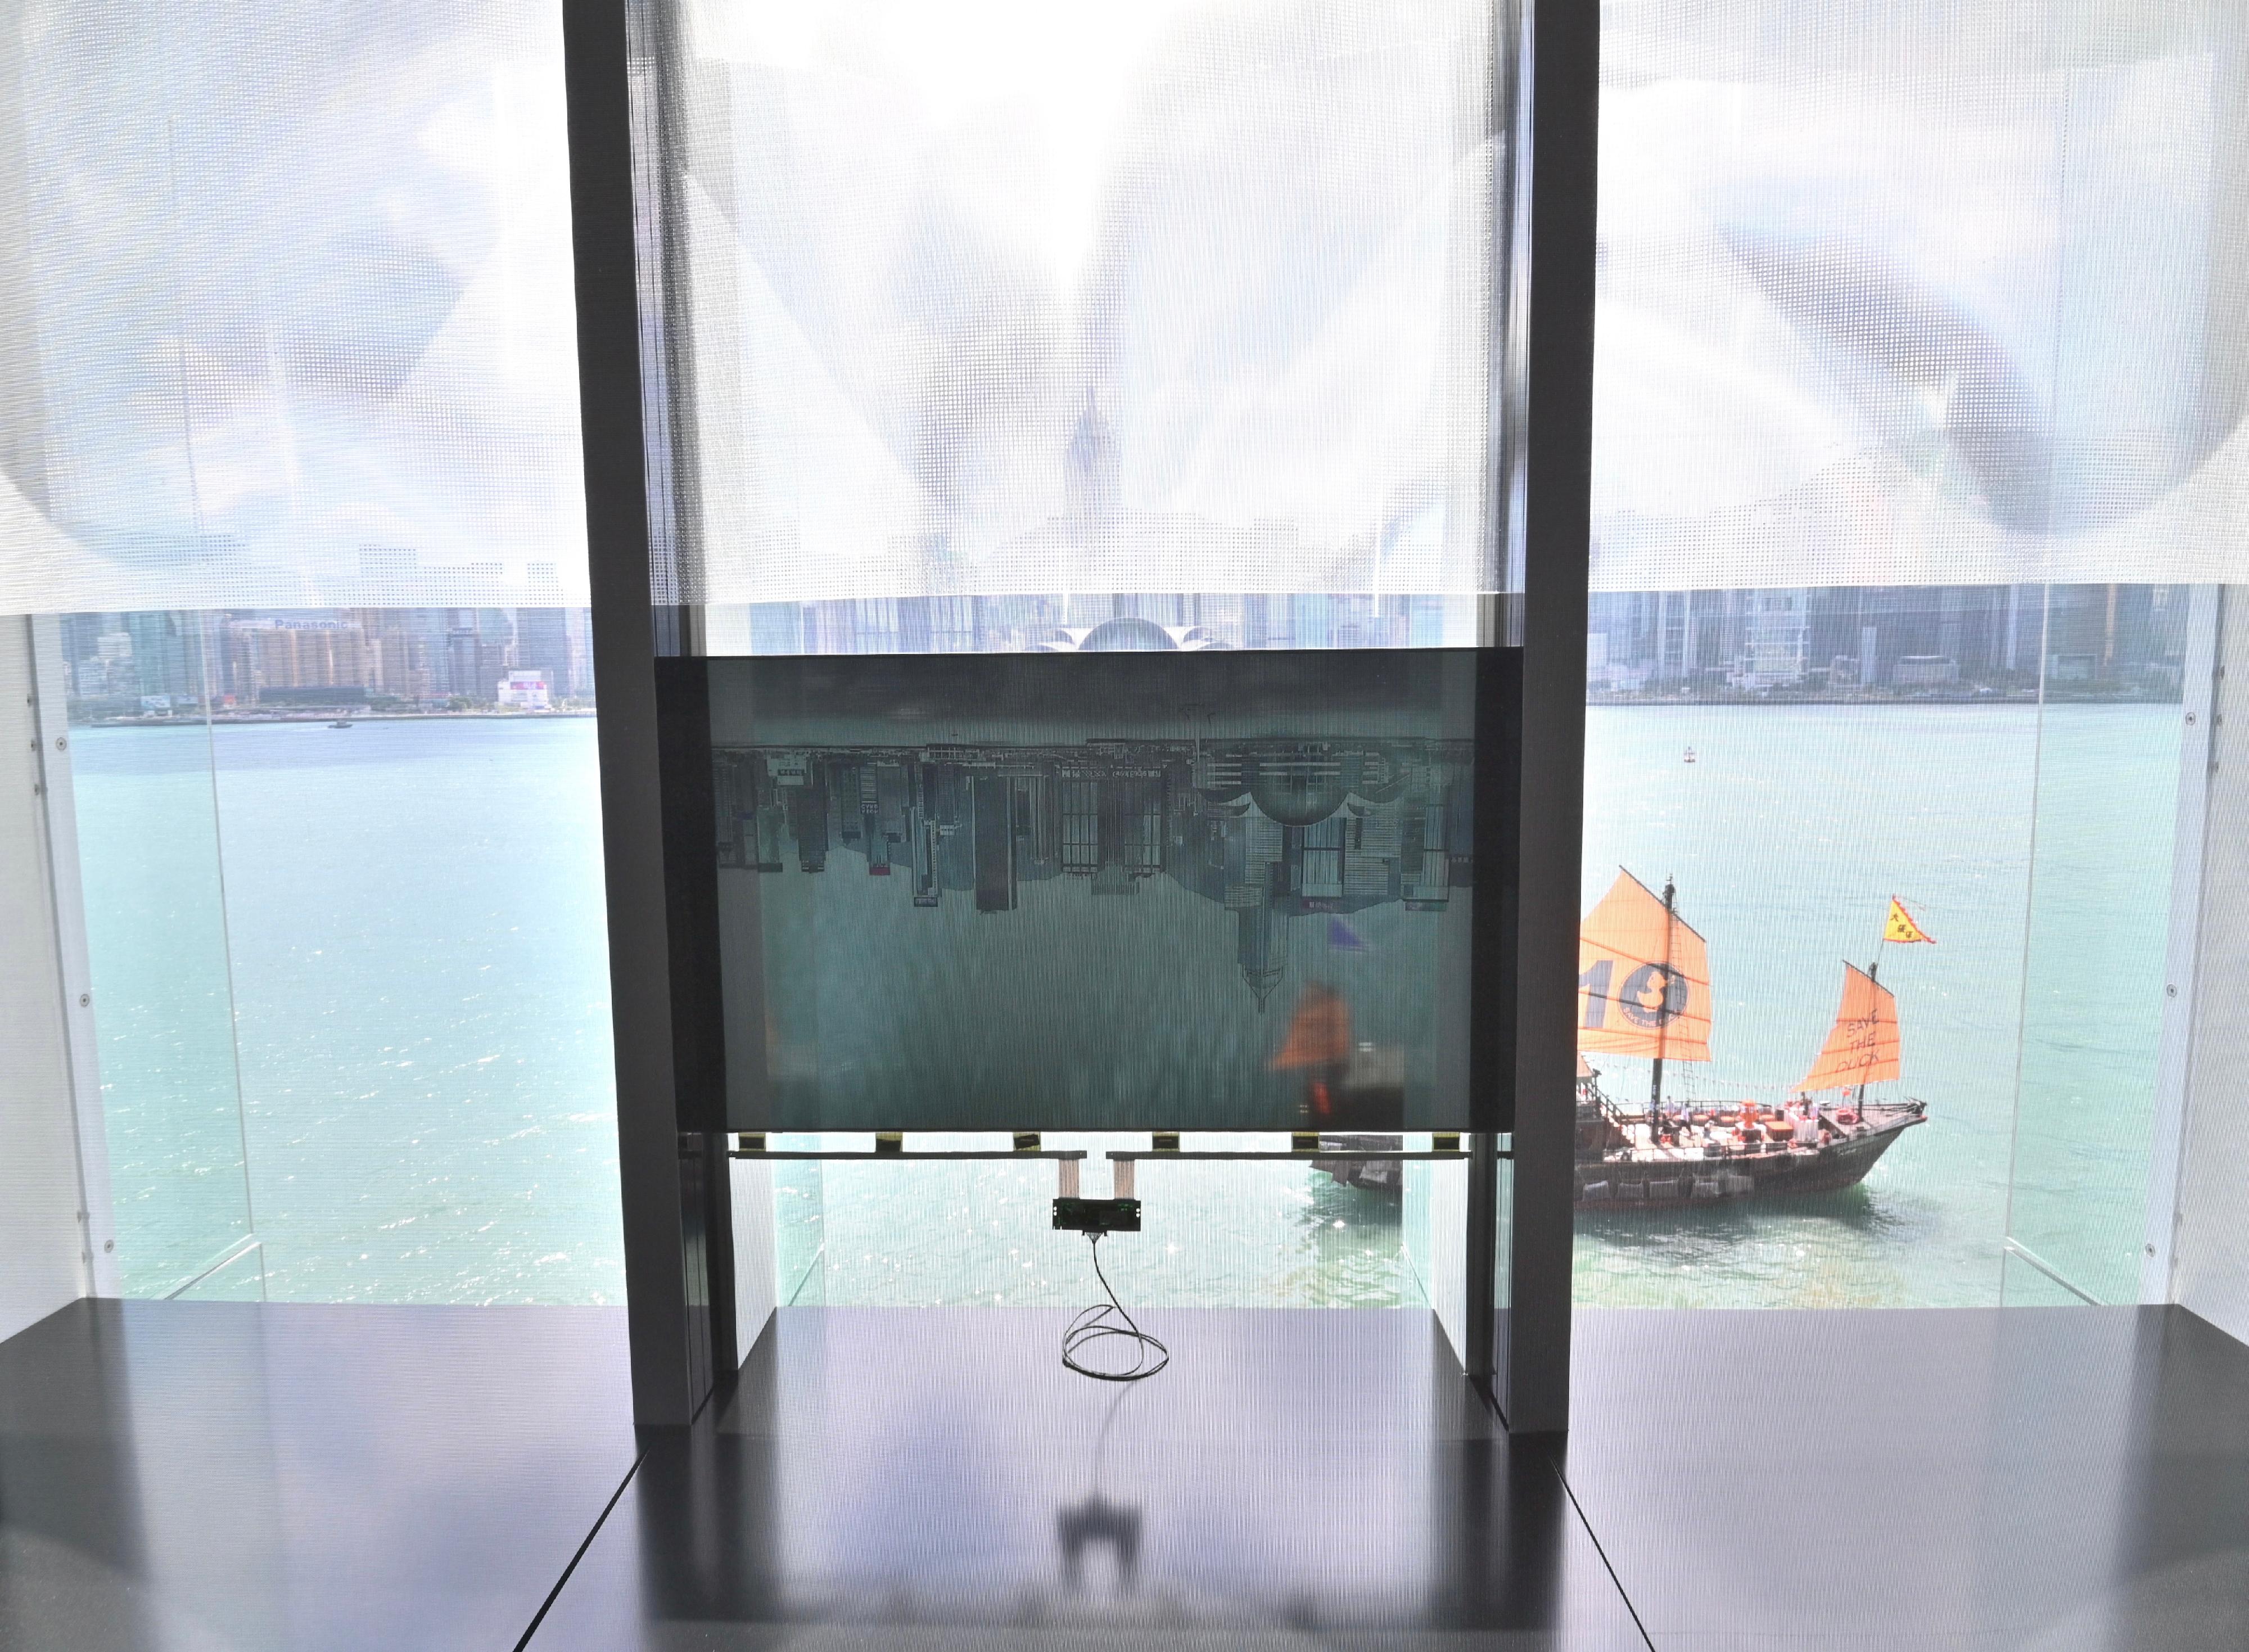 A site-specific art installation, "A 10,000-Year View", created by internationally renowned artist Zheng Chongbin, will be on display from tomorrow (October 7) on the fourth floor of the Hong Kong Museum of Art. 